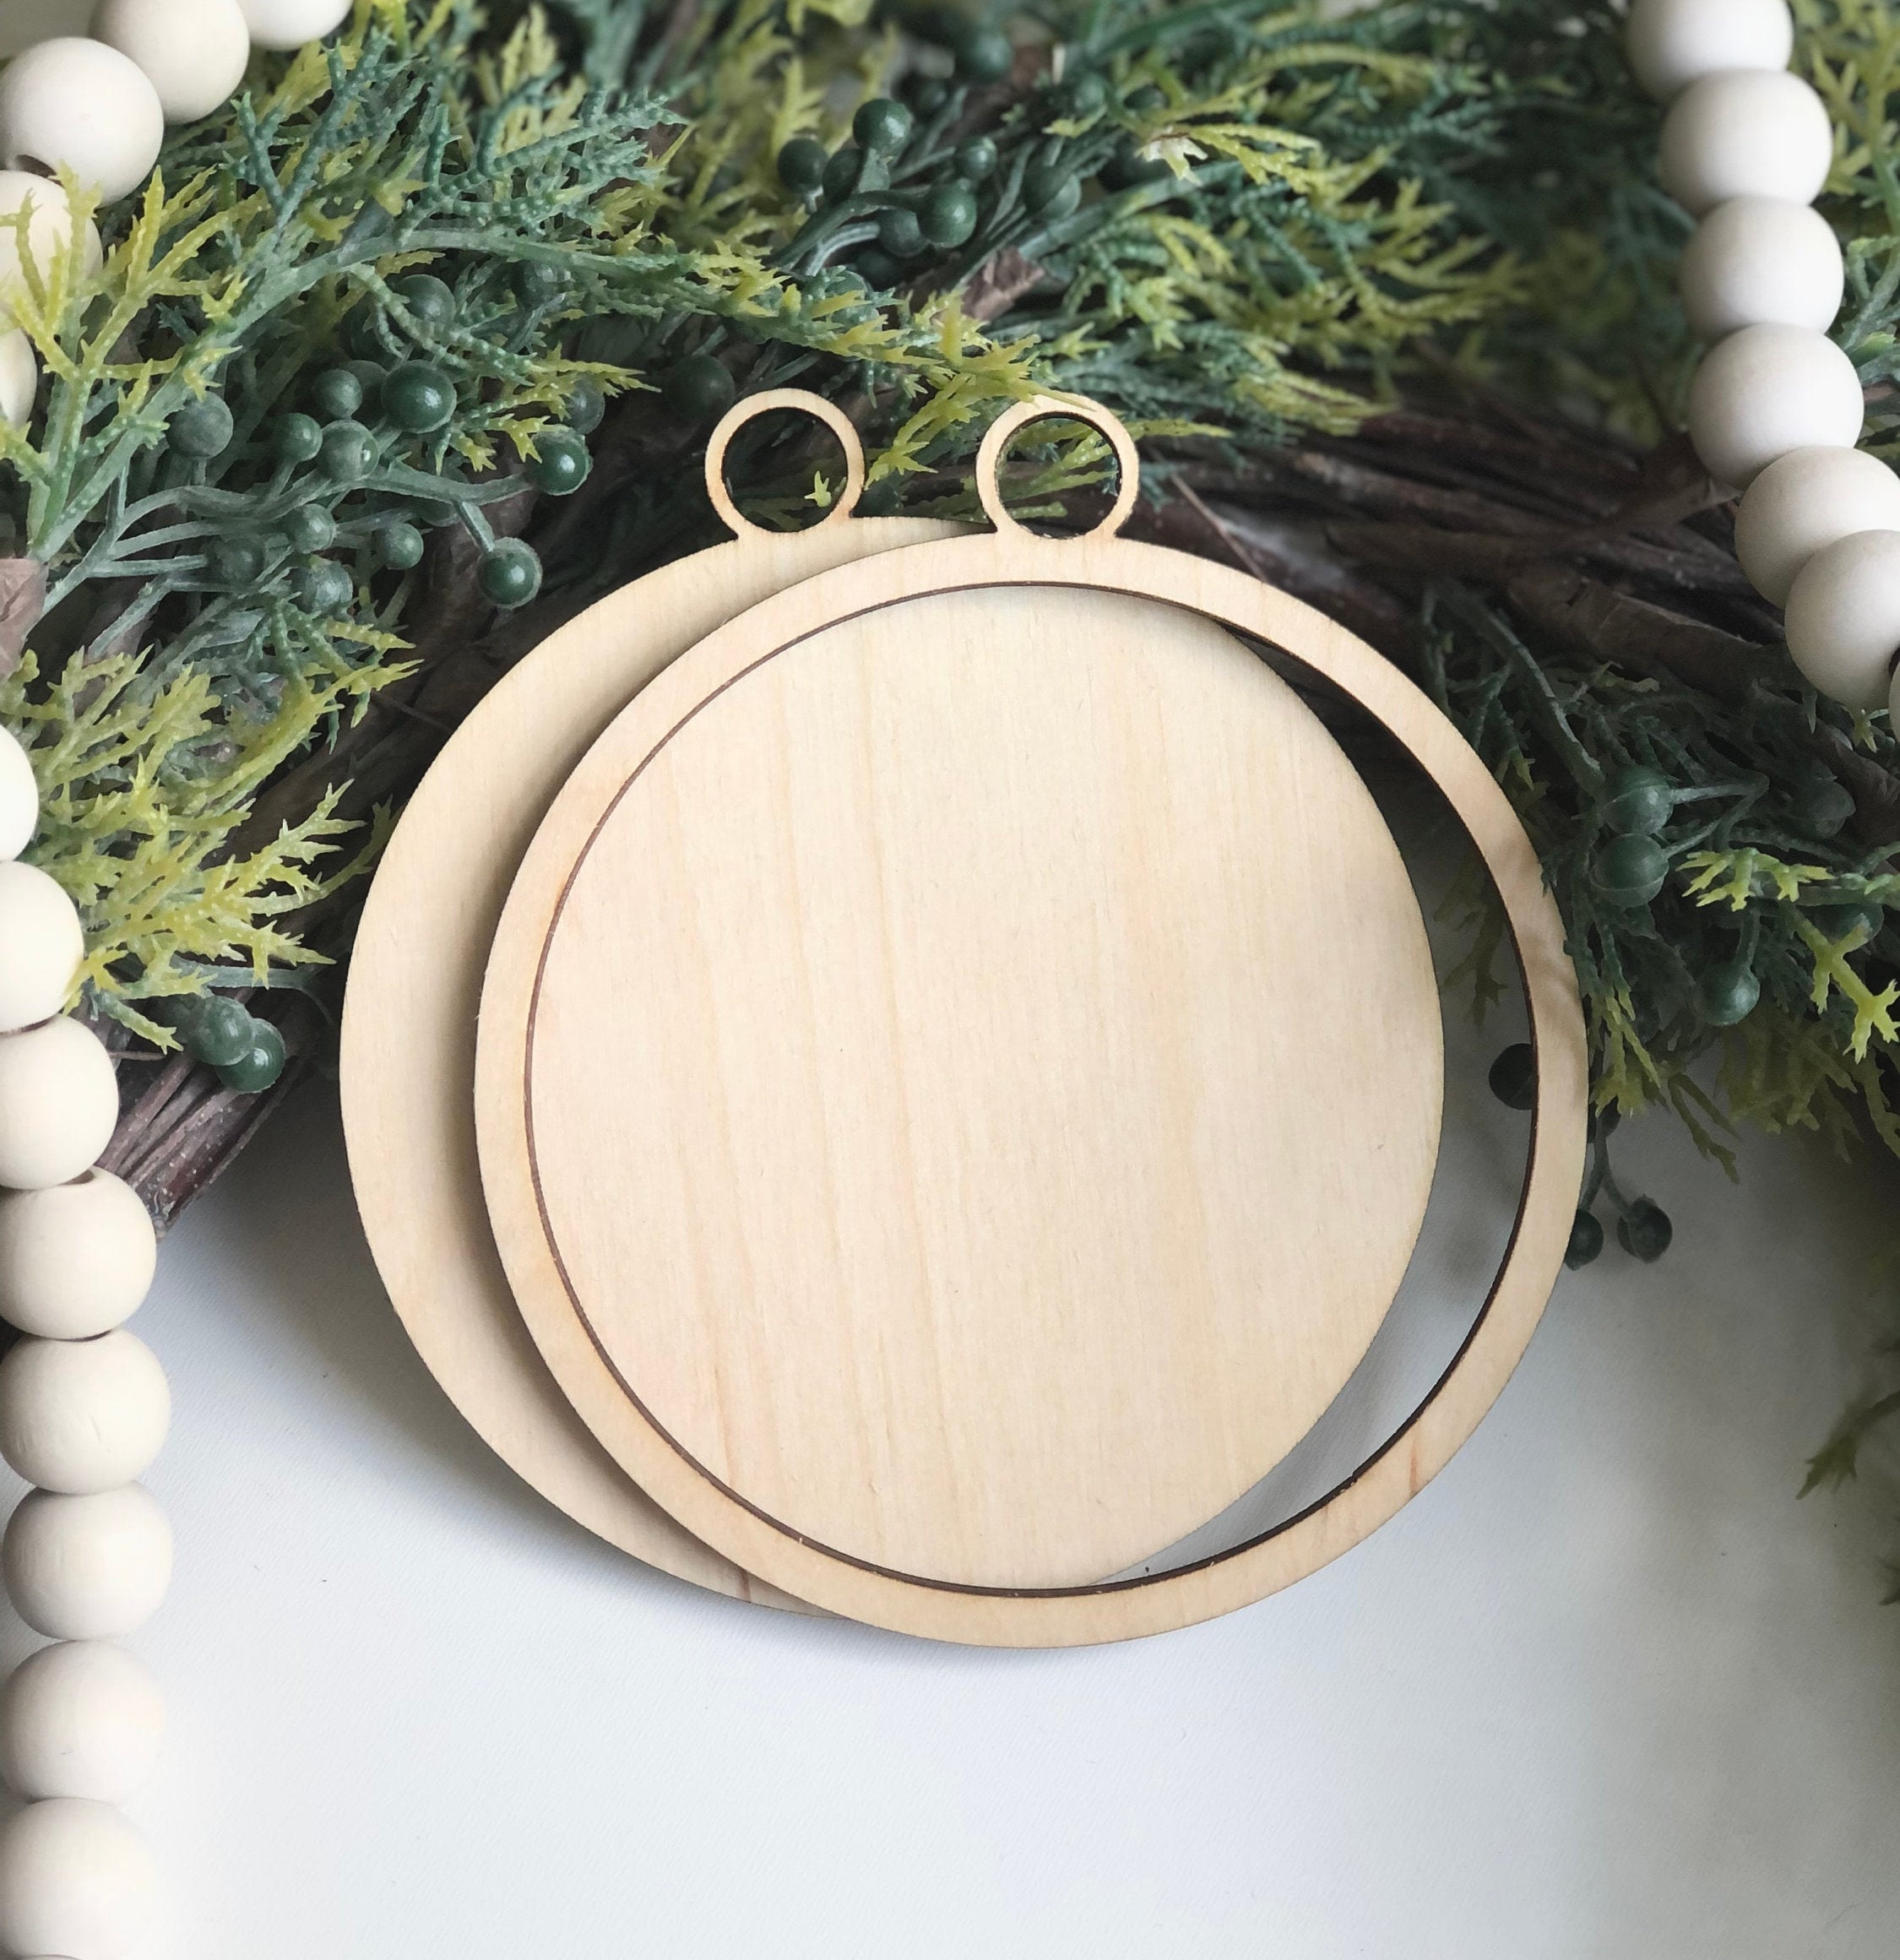 blank-ornament-template-diy-ornament-laser-cut-file-round-etsy-uk